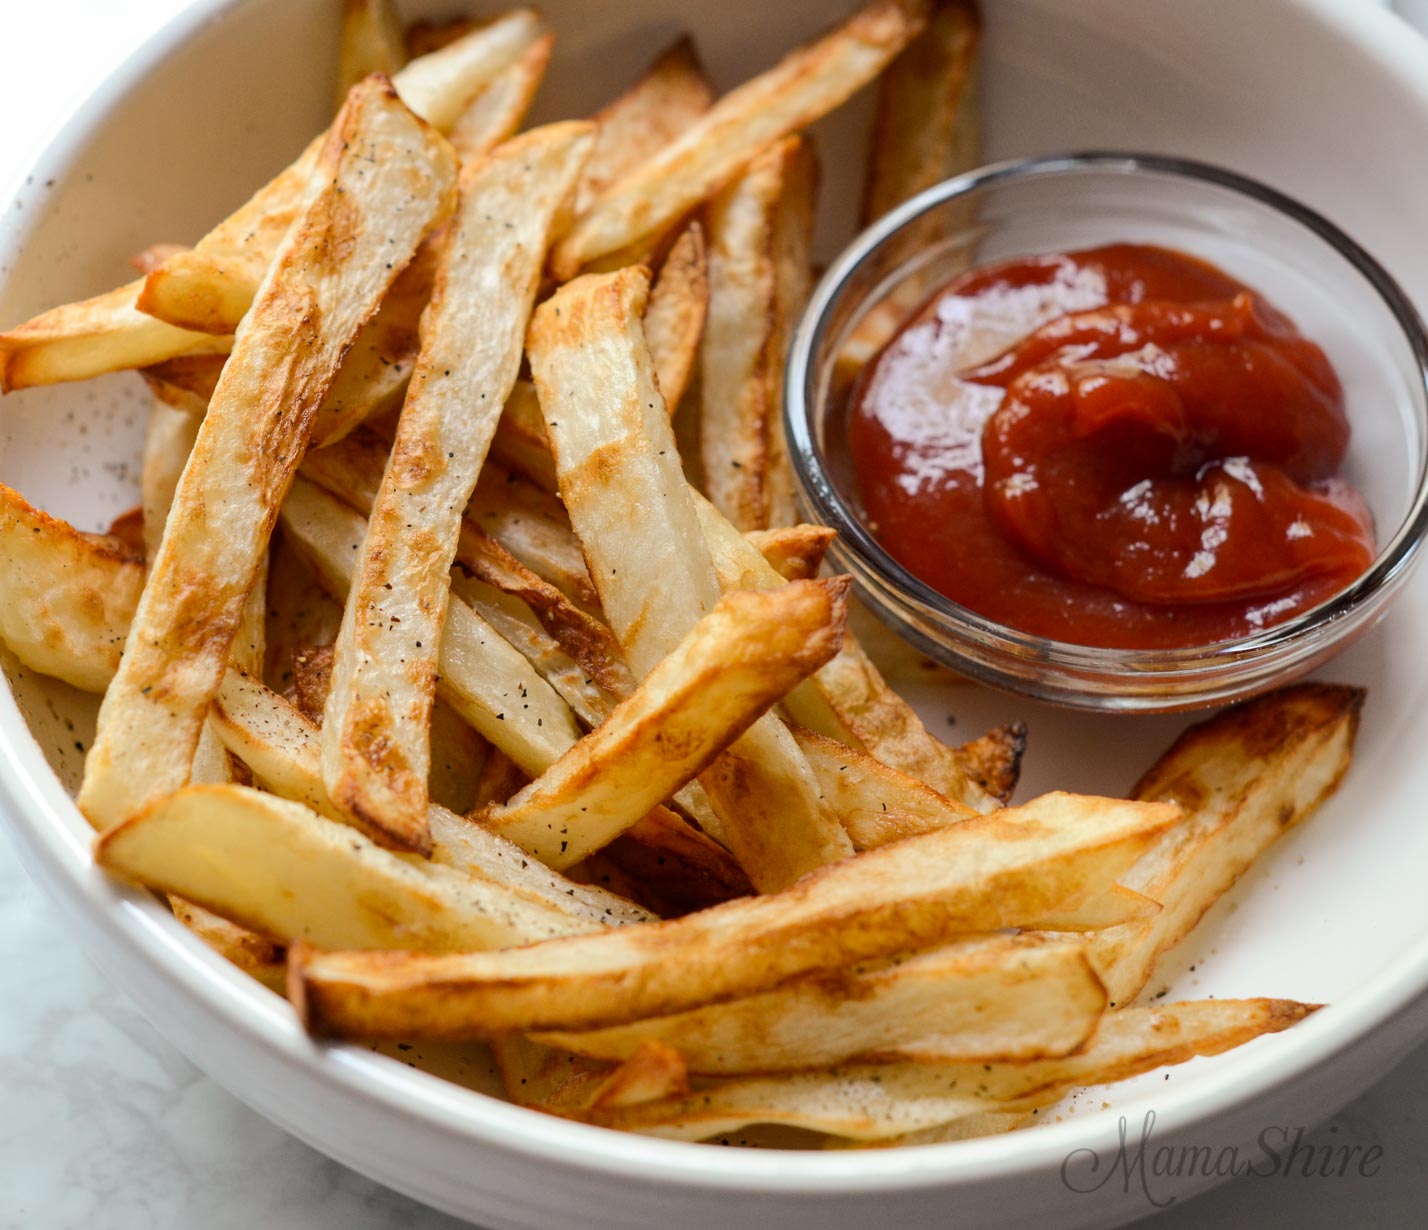 A white serving bowl filled with french fries made in an air fryer and a little serving bowl of ketchup.